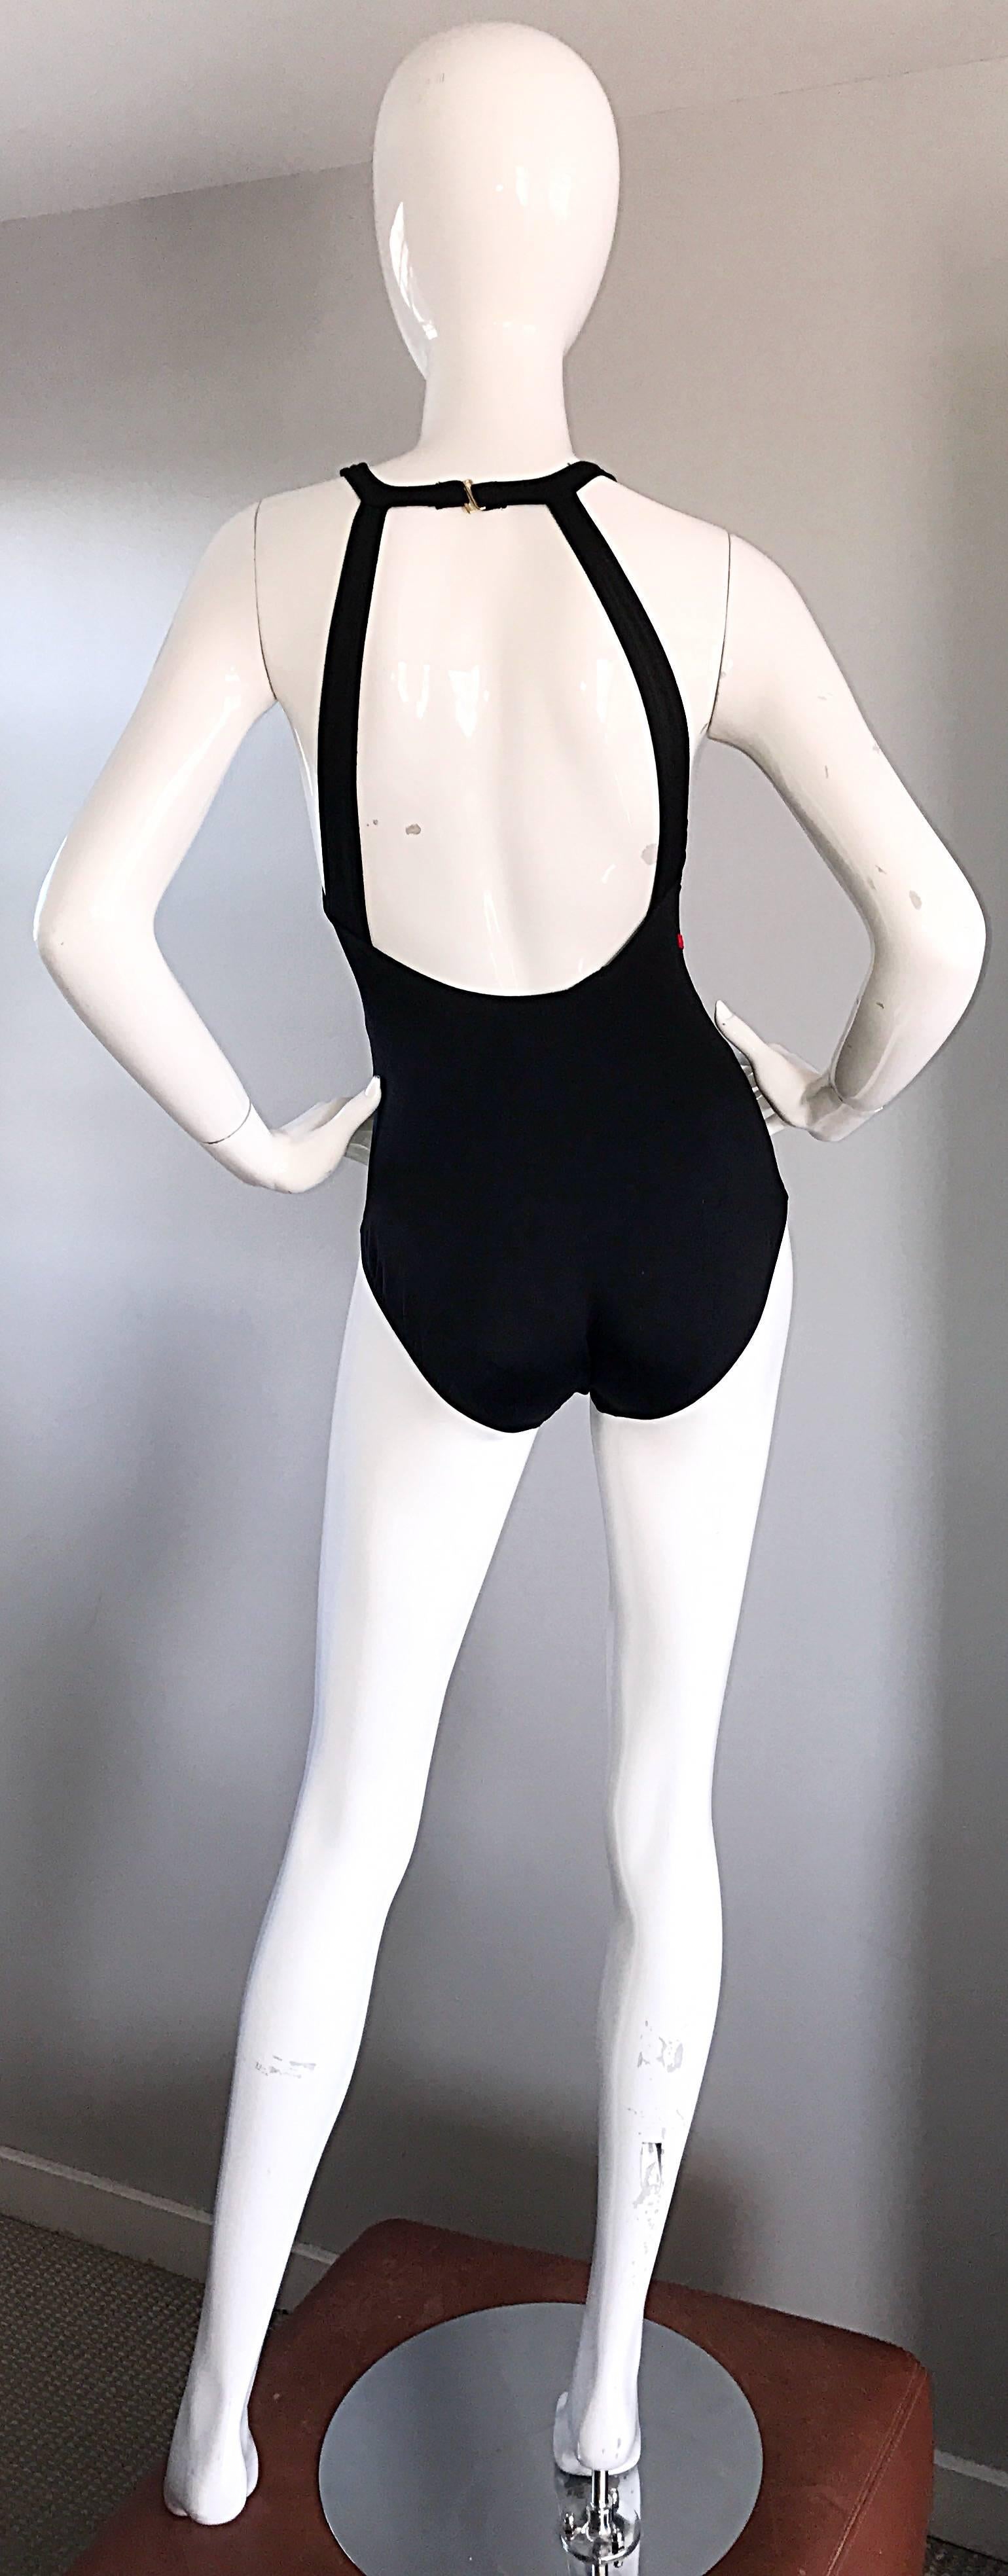 Bill Blass New Vintage 1990s 90s Chic One Piece Swimsuit / Bodysuit with Bows 3